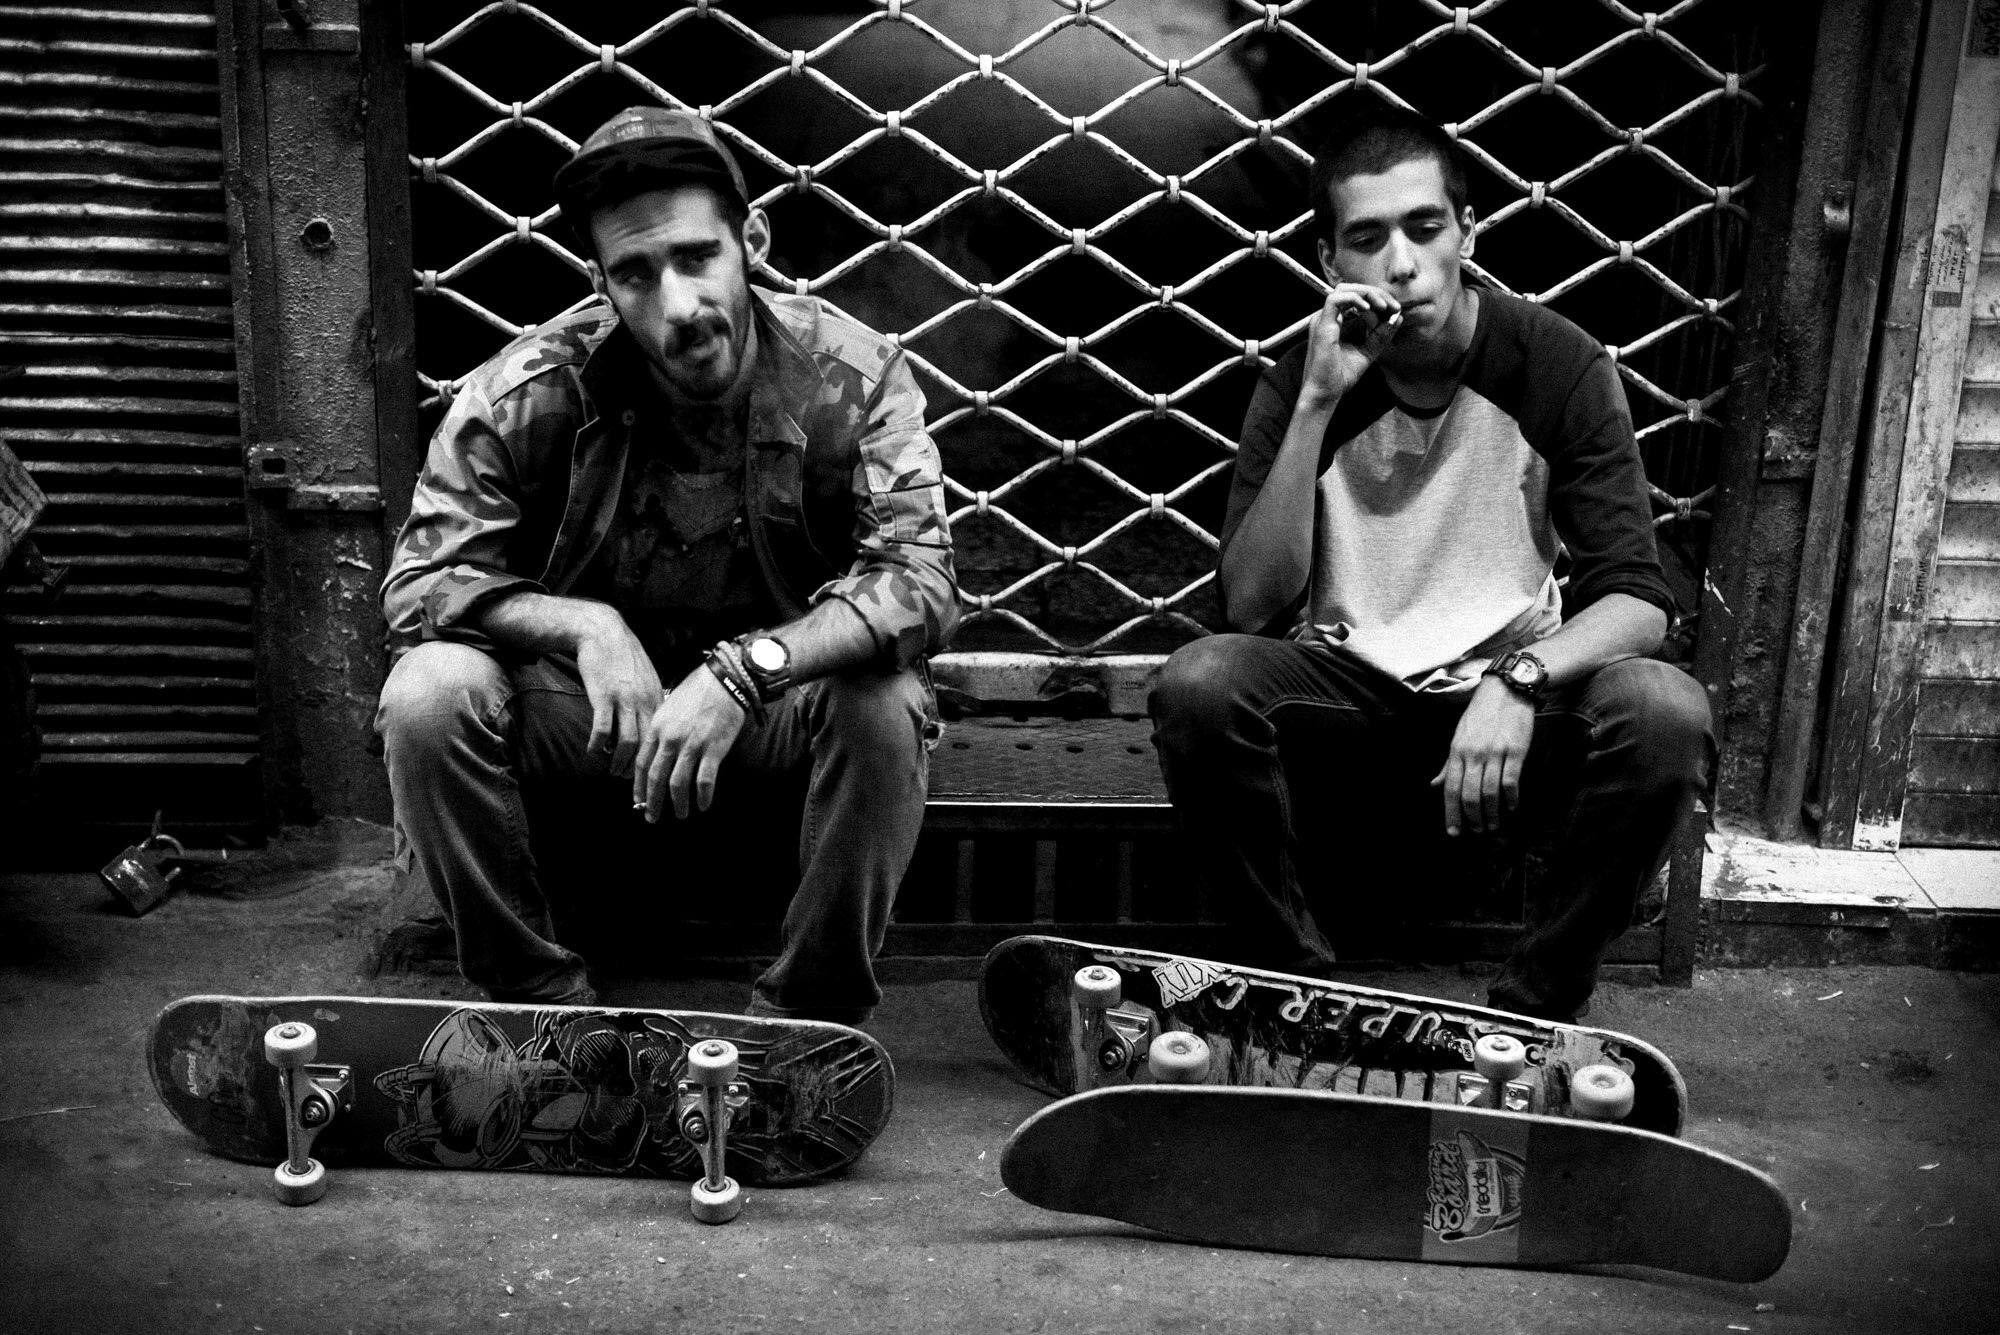  Erfan and Sajad smoke a cigarette during a skateboard session in the Grand Bazaar of Tehran, Iran, on September 24, 2015. 